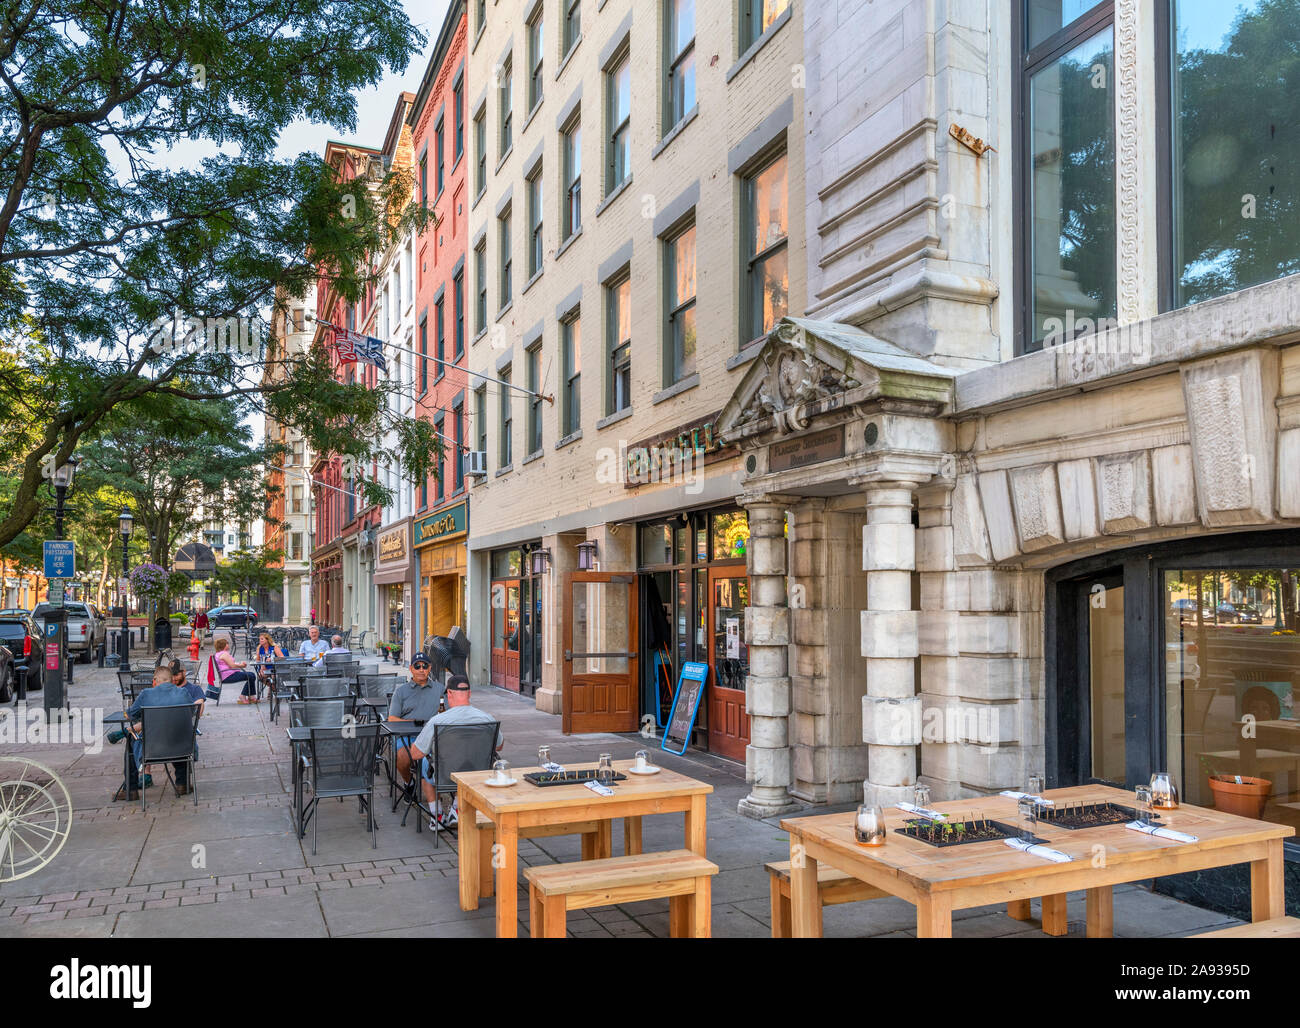 Cafes, bars and restaurants on Hanover Square in historic downtown Syracuse, New York State, USA. Stock Photo